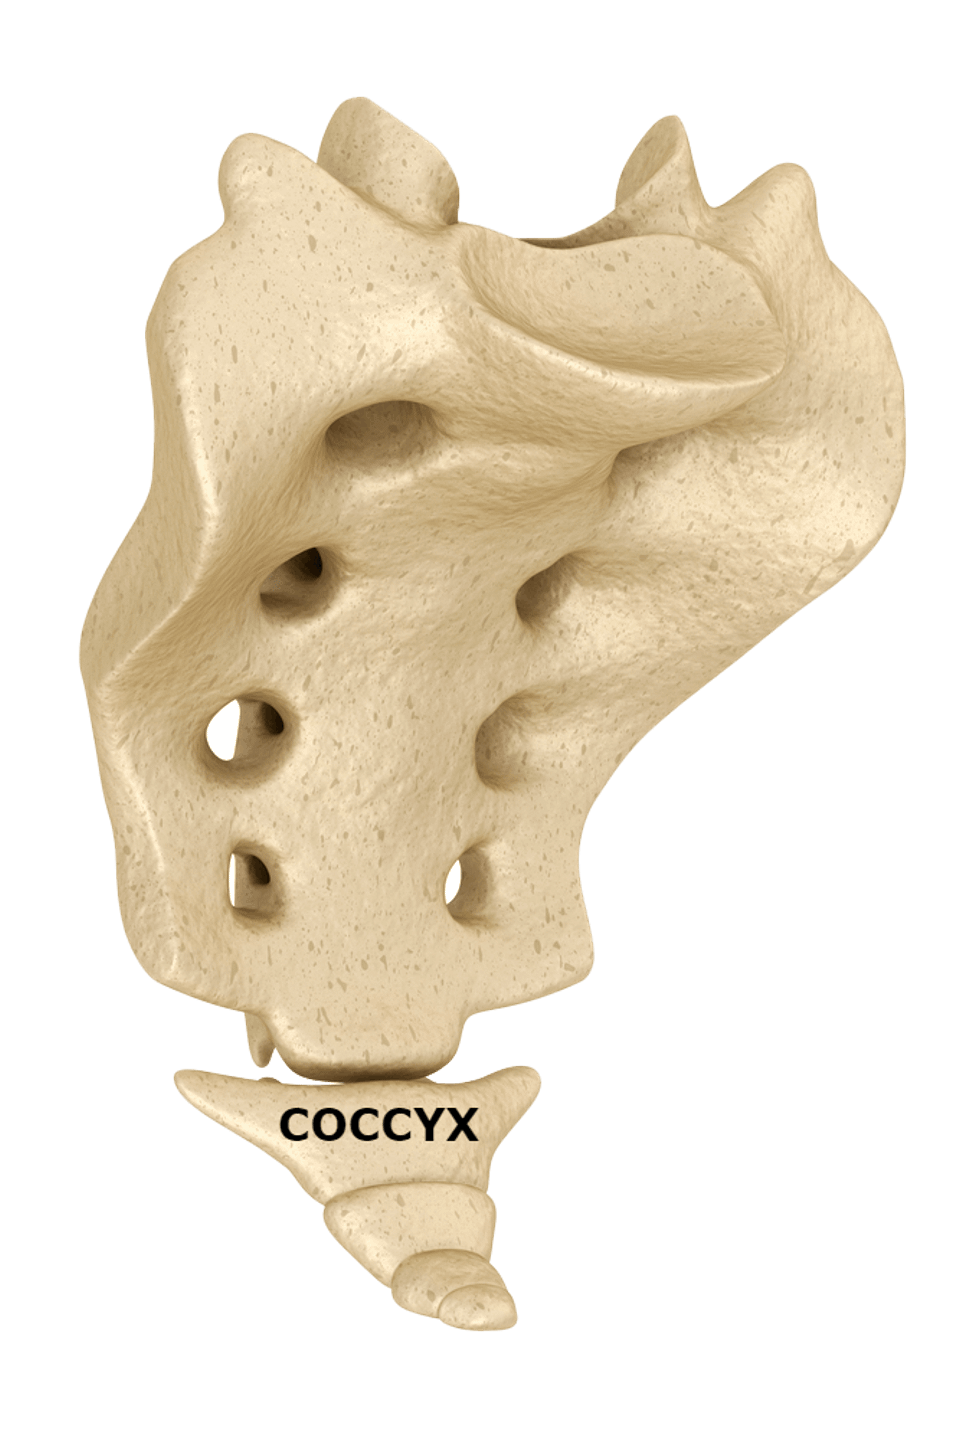 Coccyx labeled